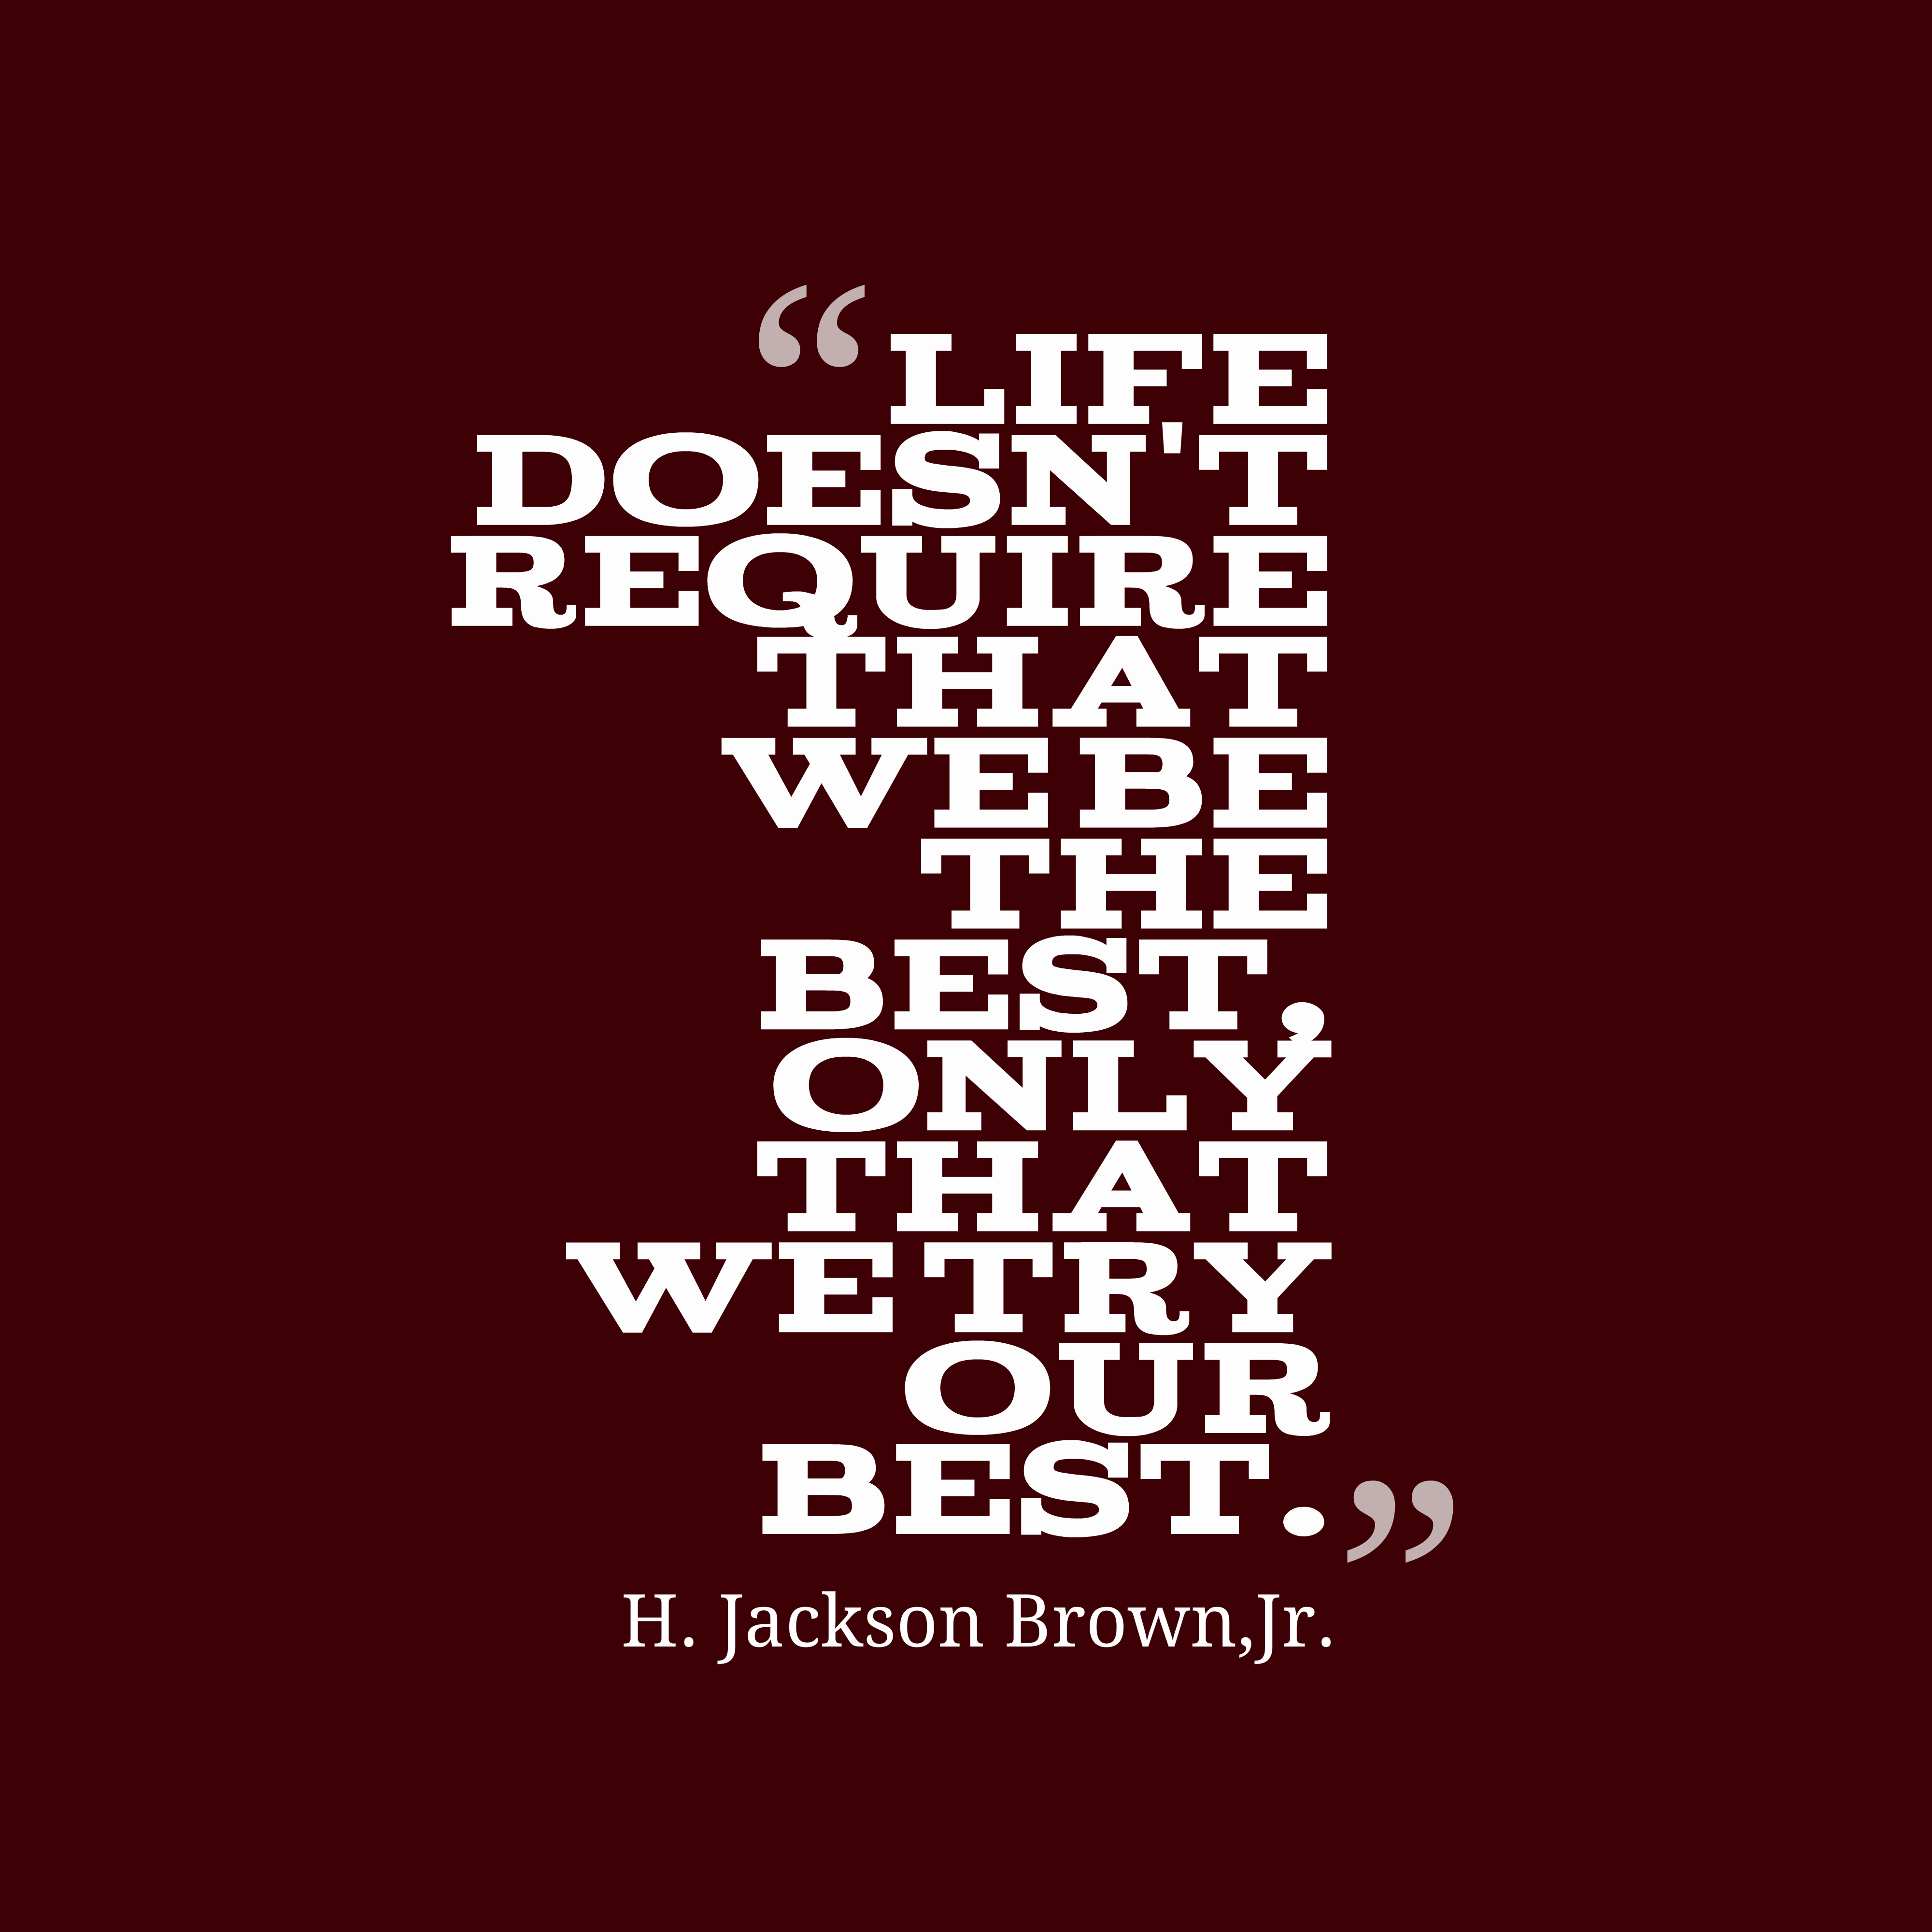 H. Jackson Brown, Jr. Quote About Life. - Try Our Best, Transparent background PNG HD thumbnail